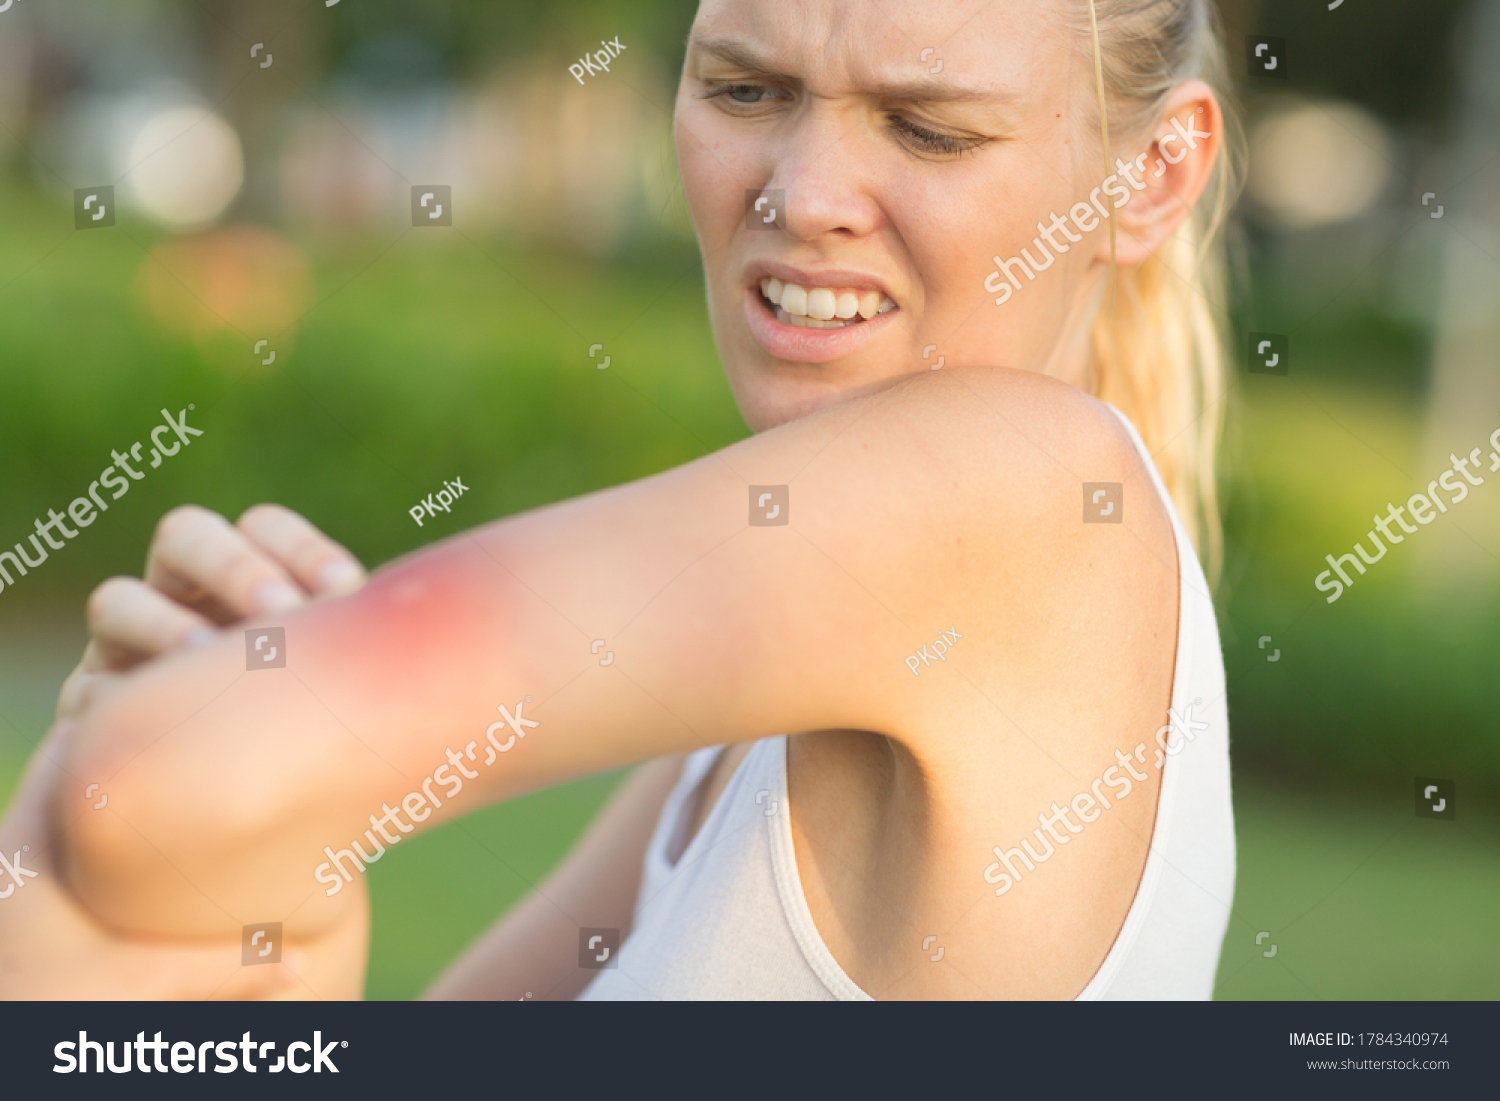 Itchy insect bite - Irritated young female scratching her itching arm from a mosquito bite at the park during summertime. #1784340974